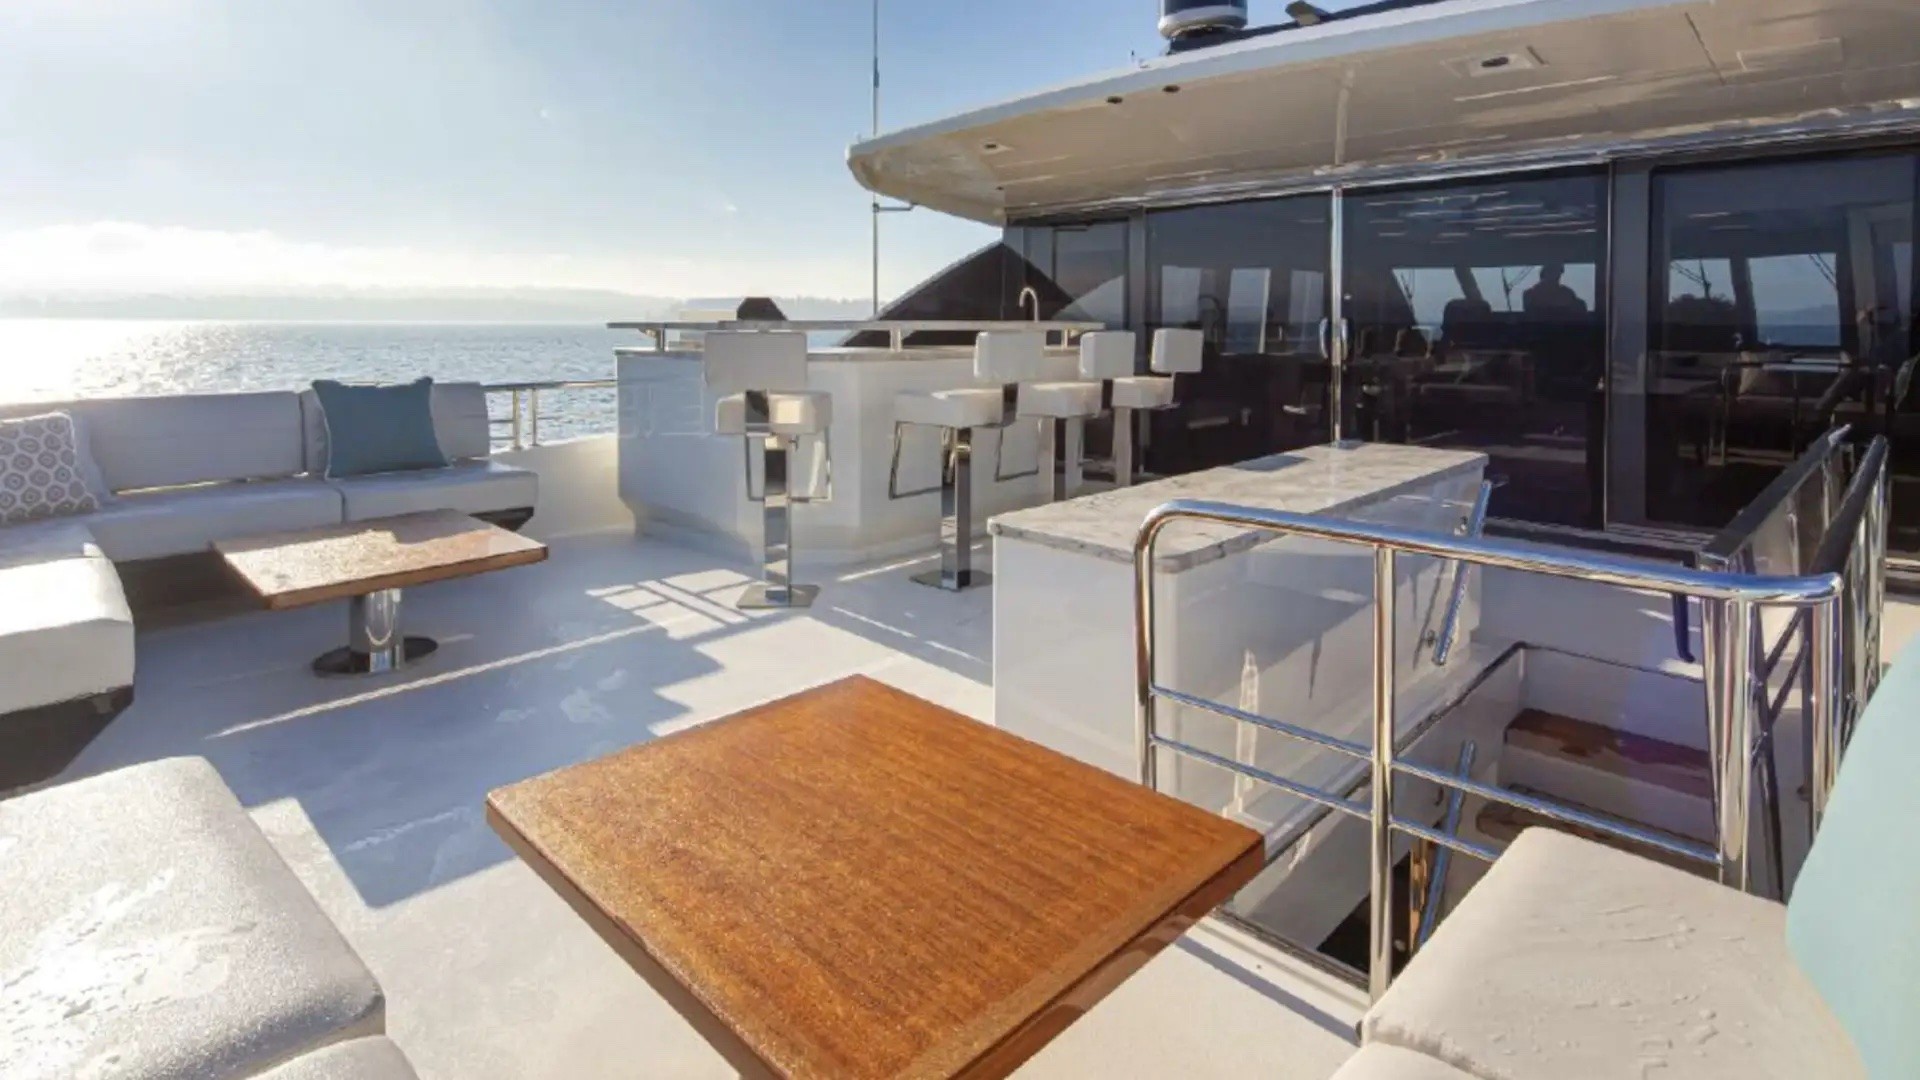 the golden standard for comfort and peace can be found in the 8 million tlc yacht 3